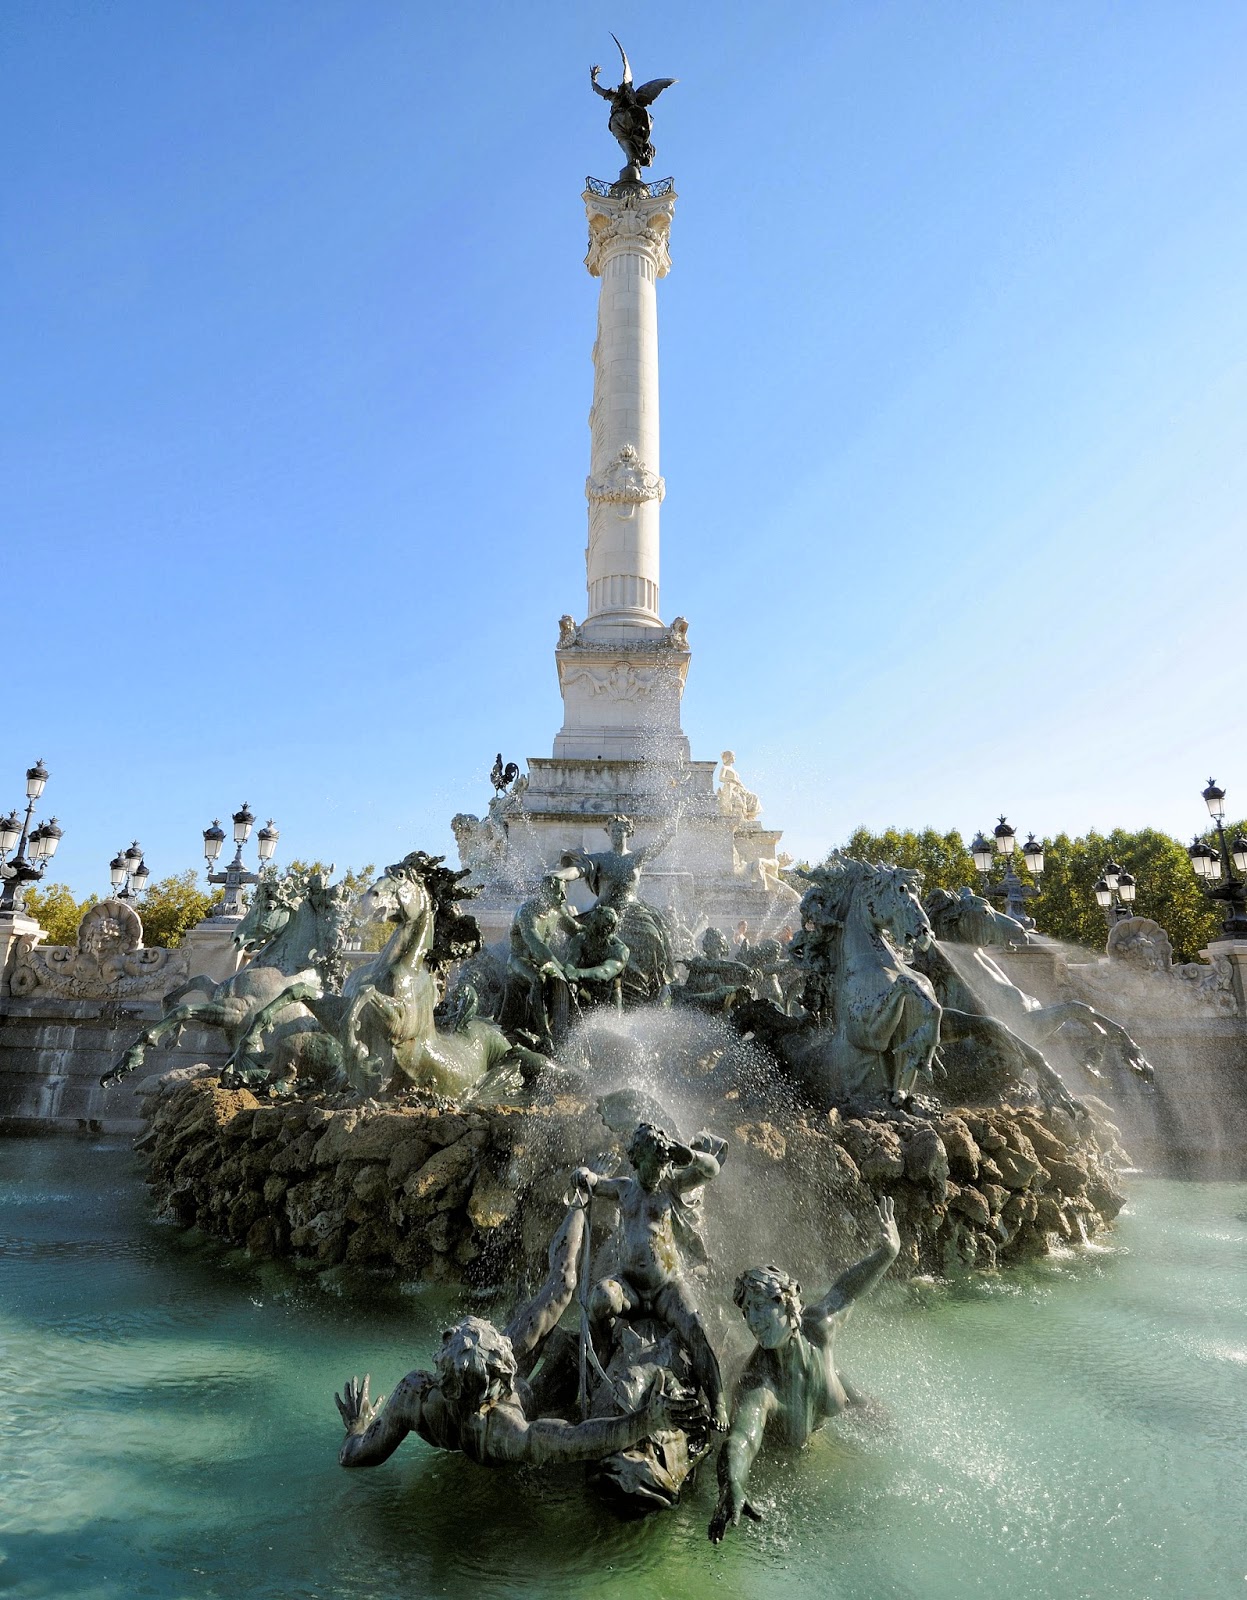 The Girondins Monument at Place des Quinconces in Bordeaux. Freedom breaks free from her shackles and offers Bordeaux the palm of victory at the top of the column. Erected at the turn of the 20th century, it honors those who fell during the Reign of Terror after the French Revolution. Photo: Property of Viking River Cruises. Unauthorized use is prohibited.